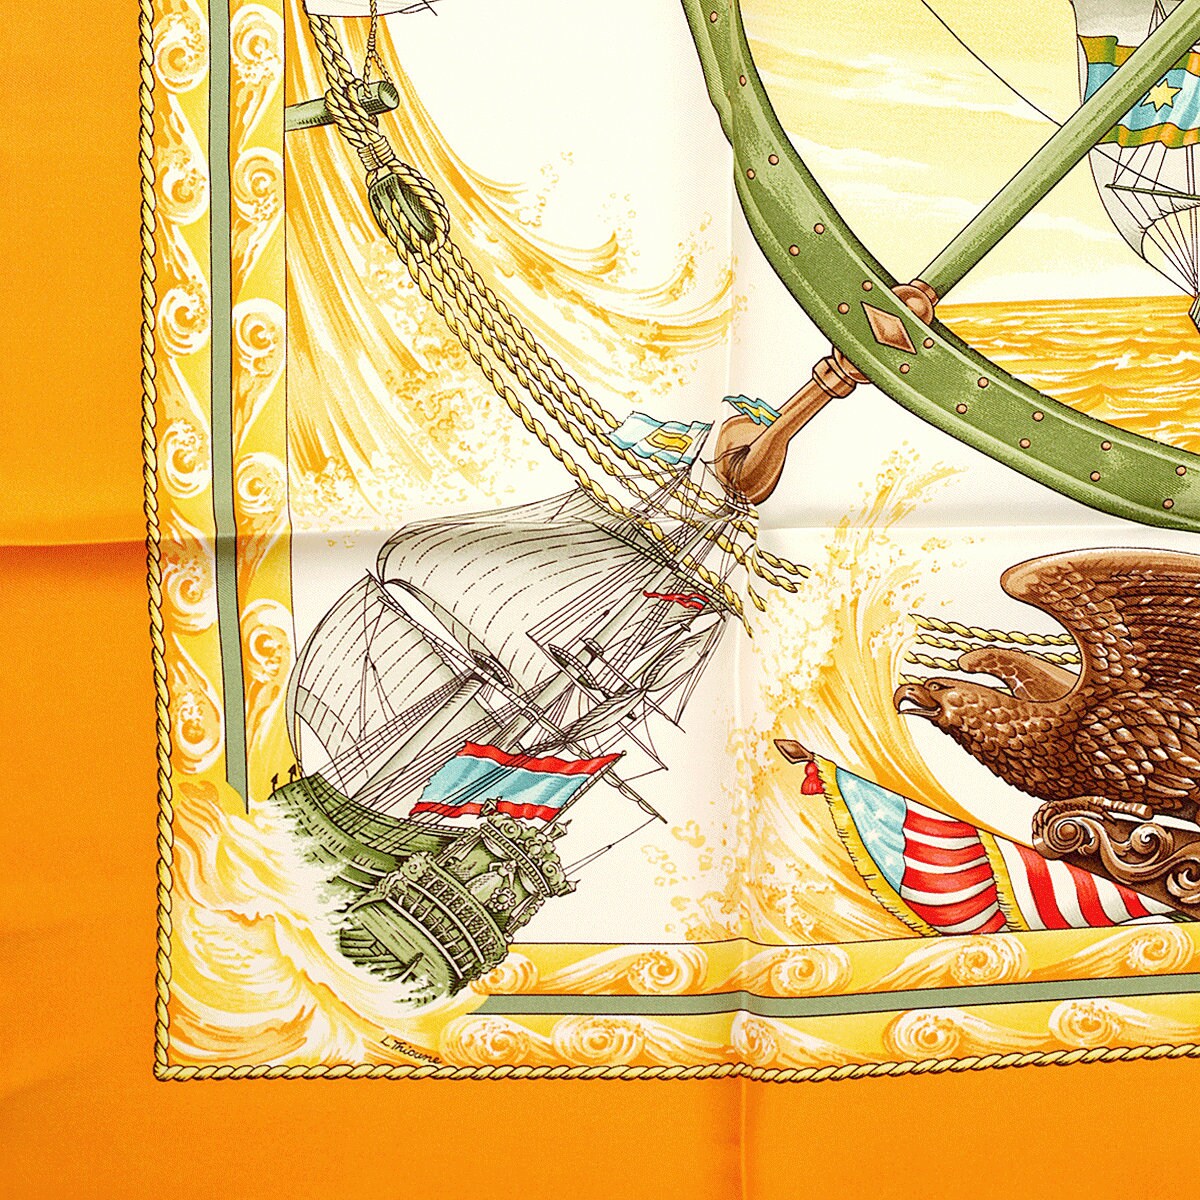 Hermes Scarf "Vive le Vent" by Laurence Bourthoumieux 90cm Silk | Carre Foulard